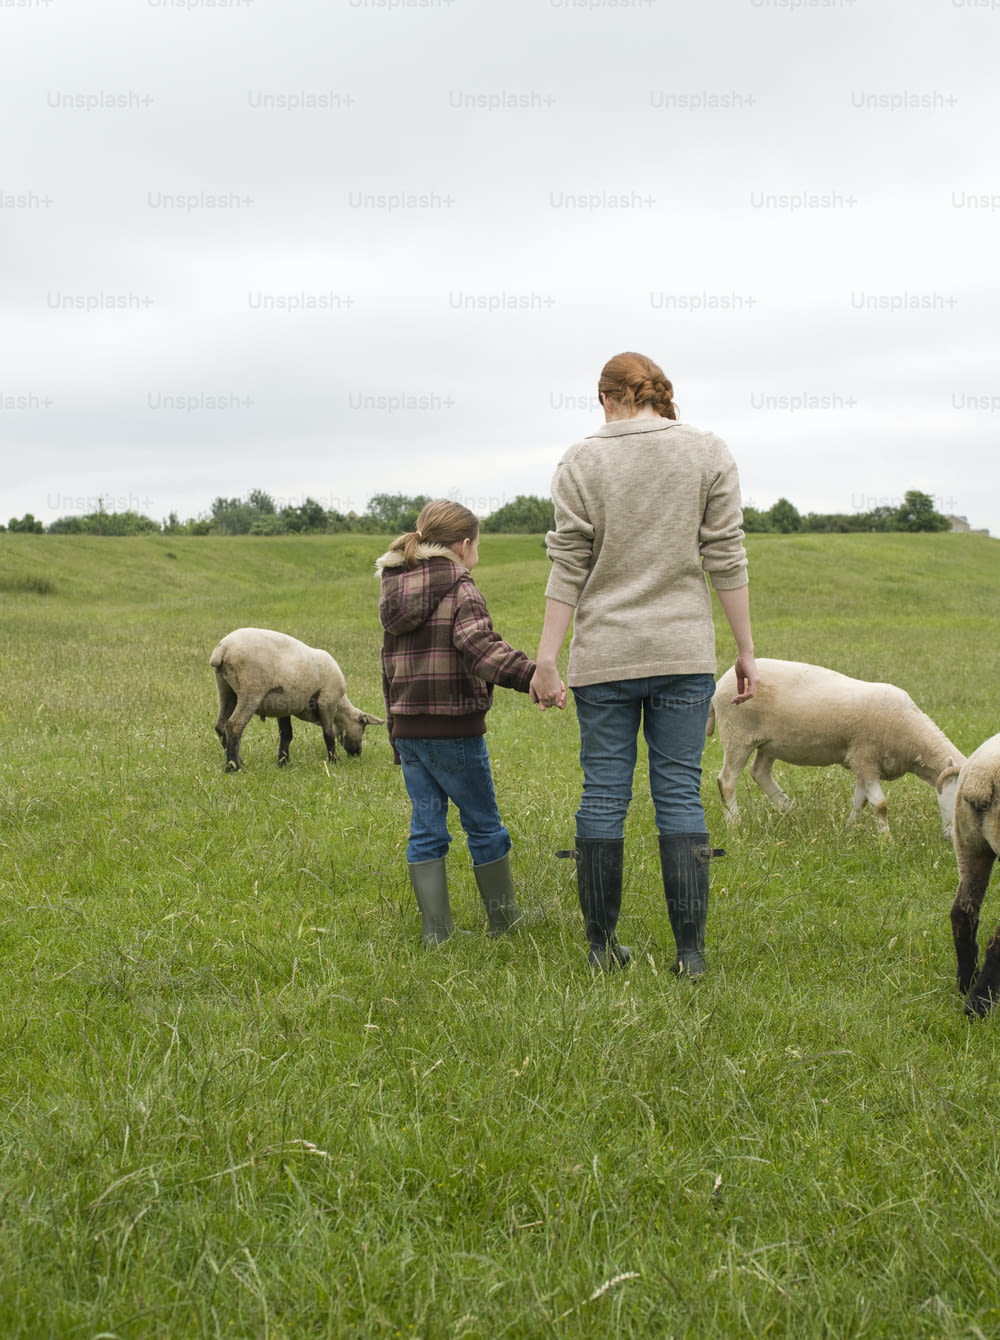 a woman and a child are standing in a field with sheep